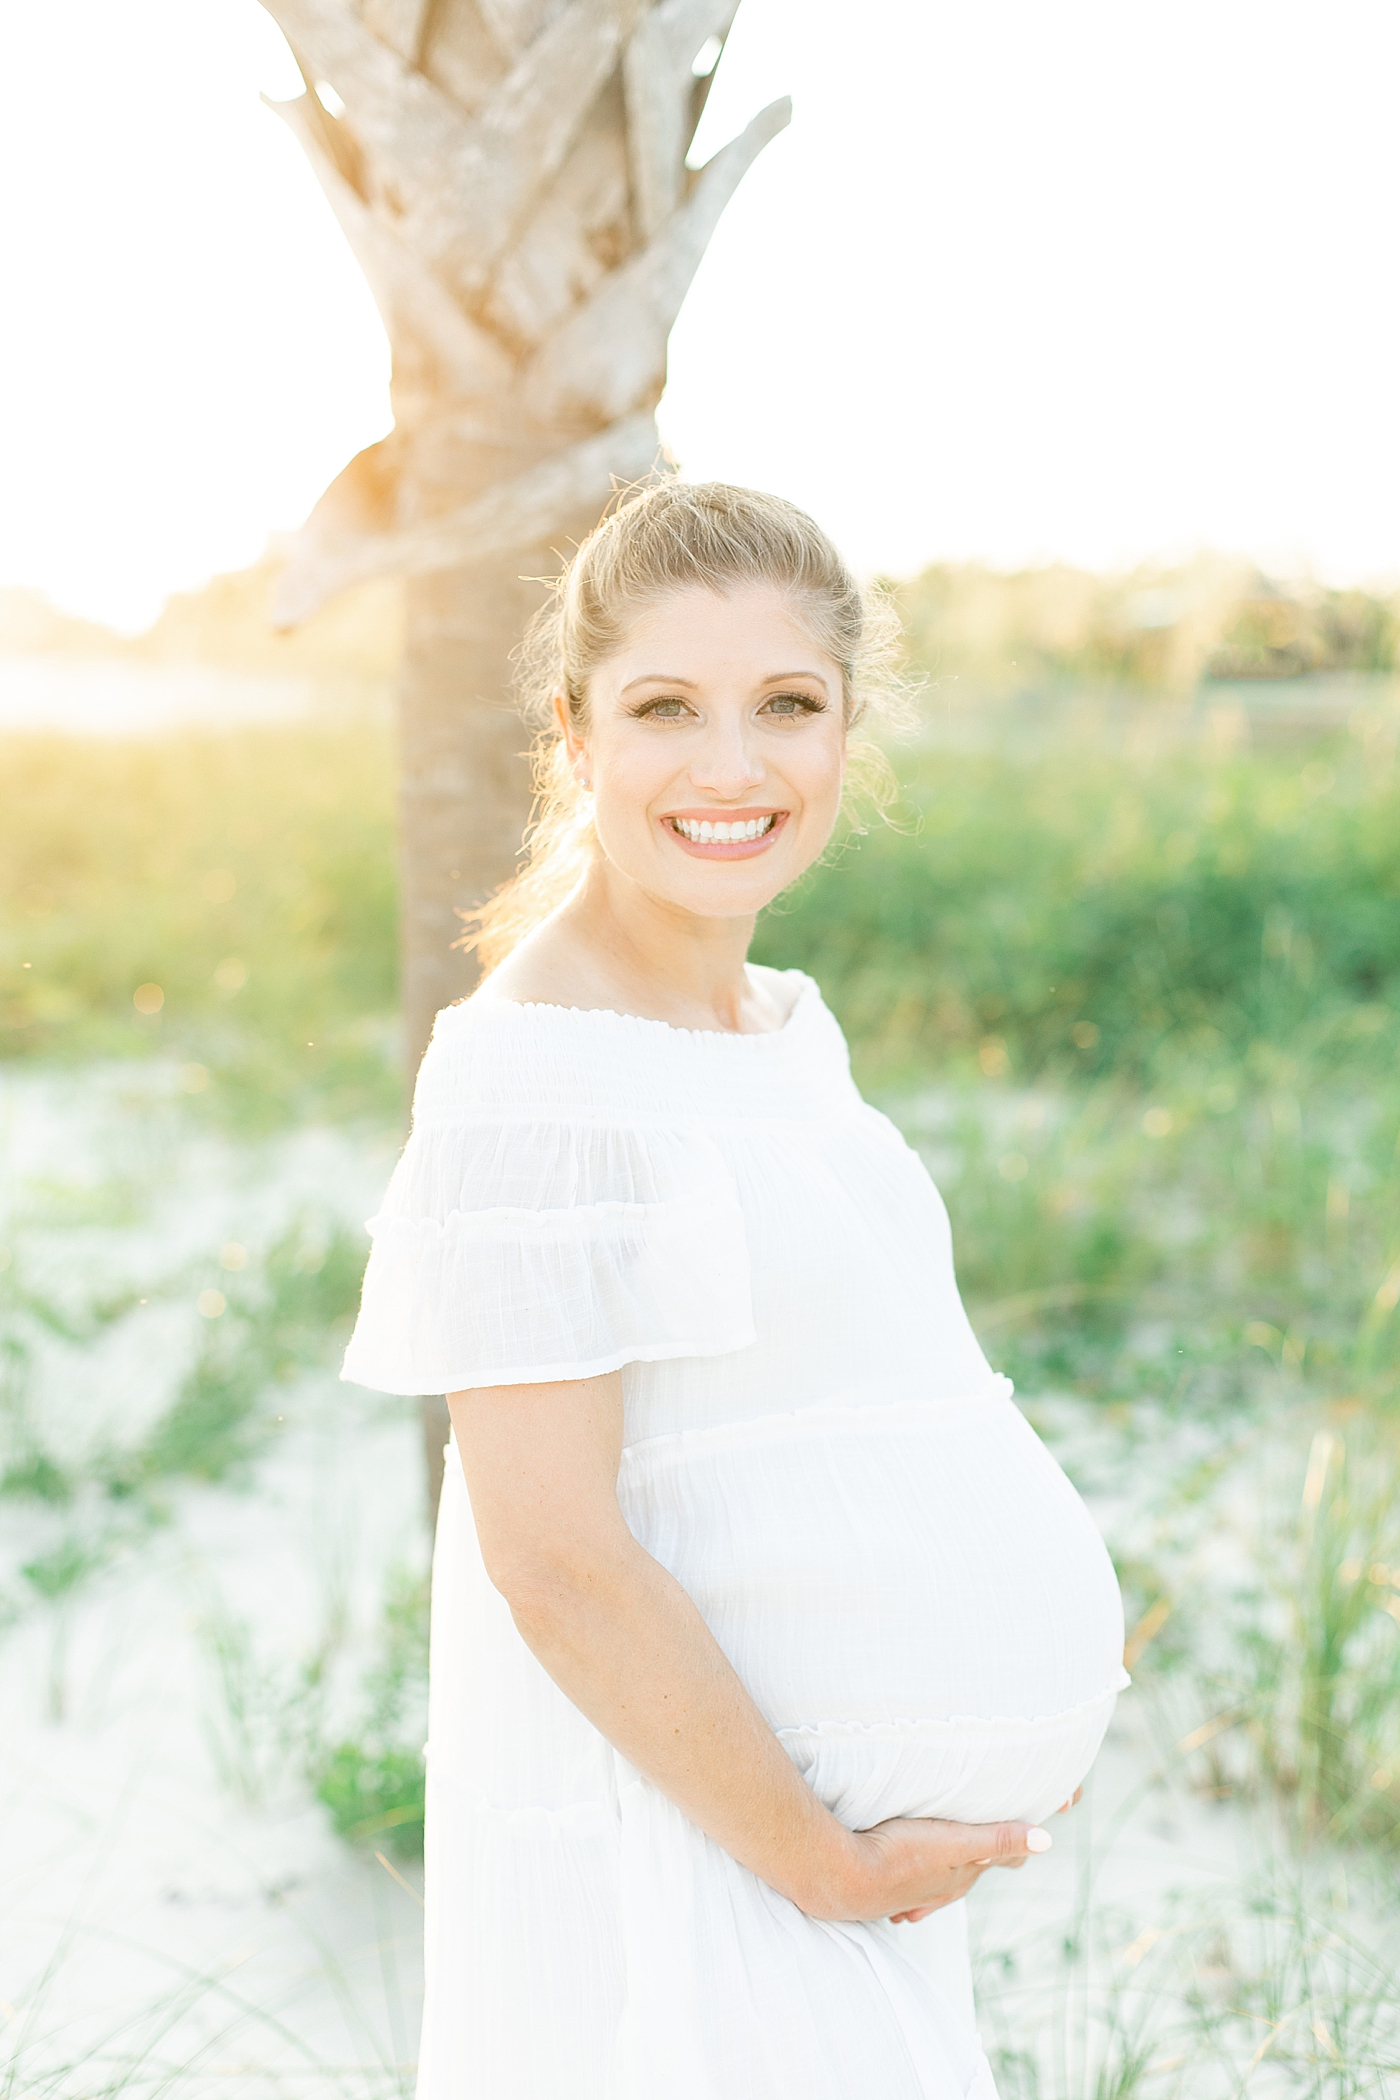 Expectant mother photos on the beach. Photo by Little Sunshine Photography.